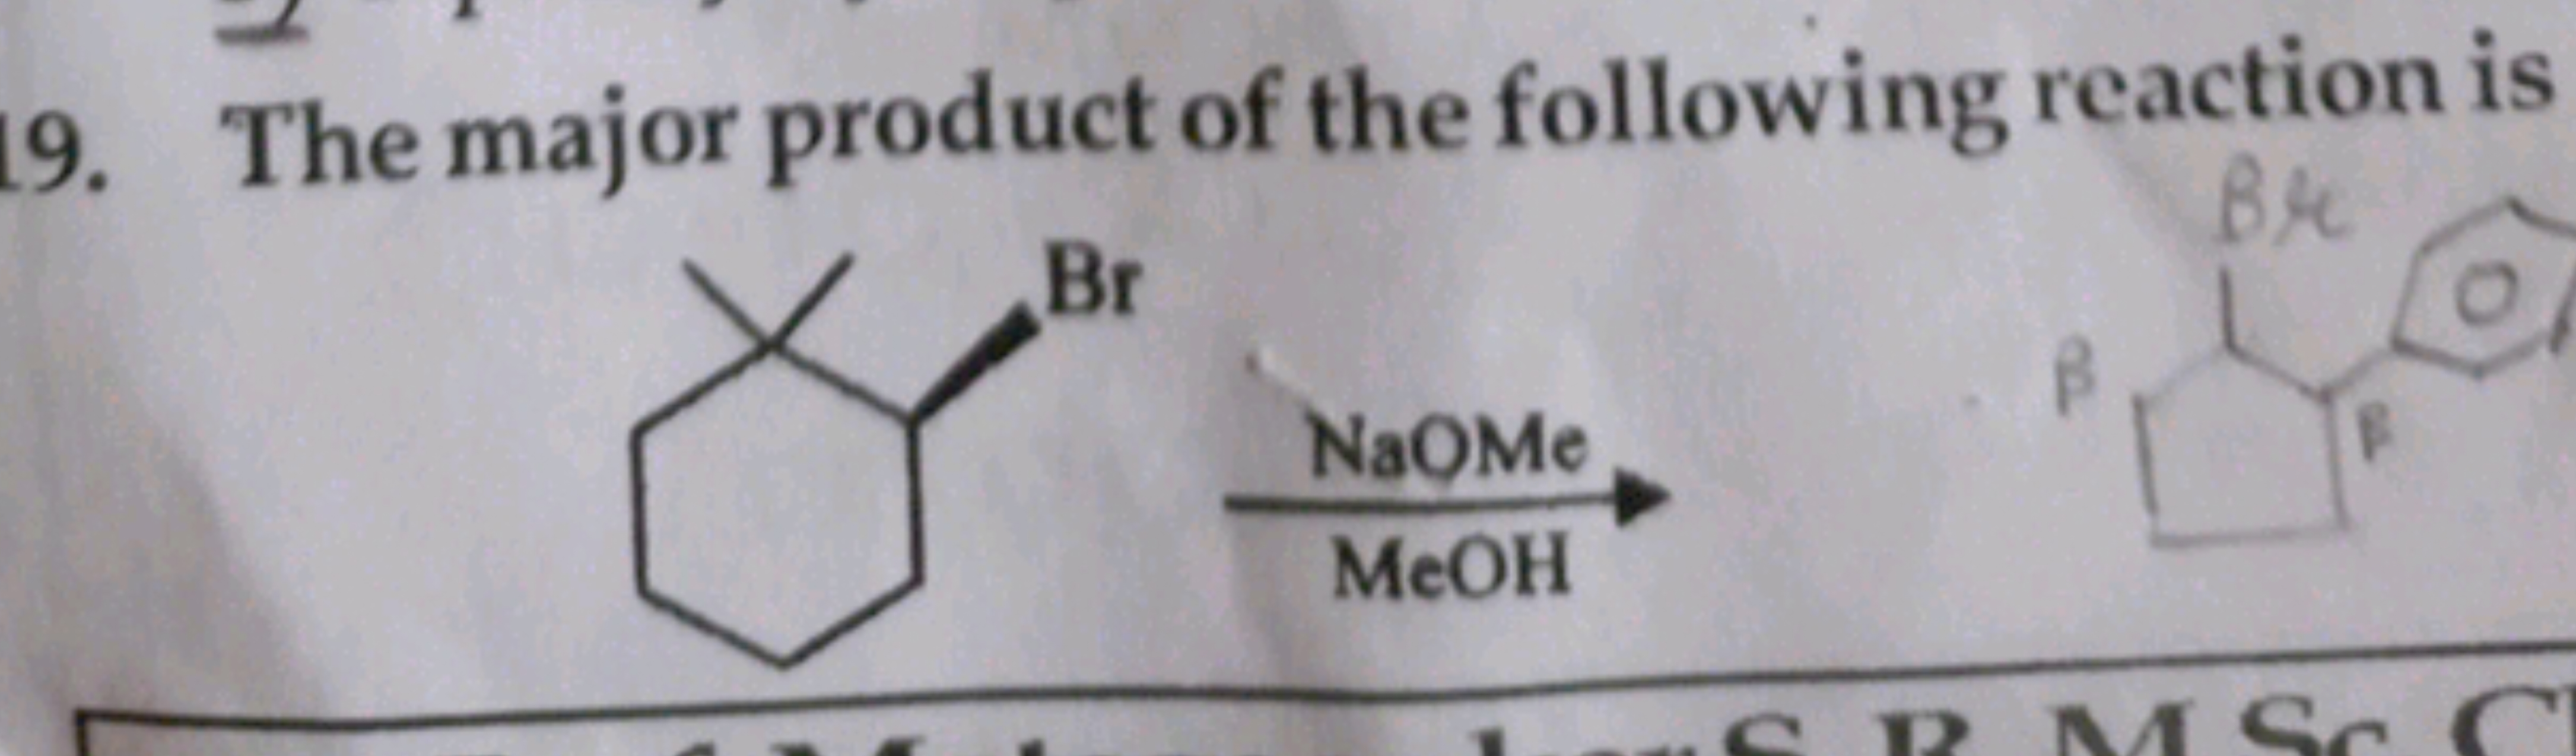 19. The major product of the following reaction is
CC1(C)CCCC[C@@H]1Br